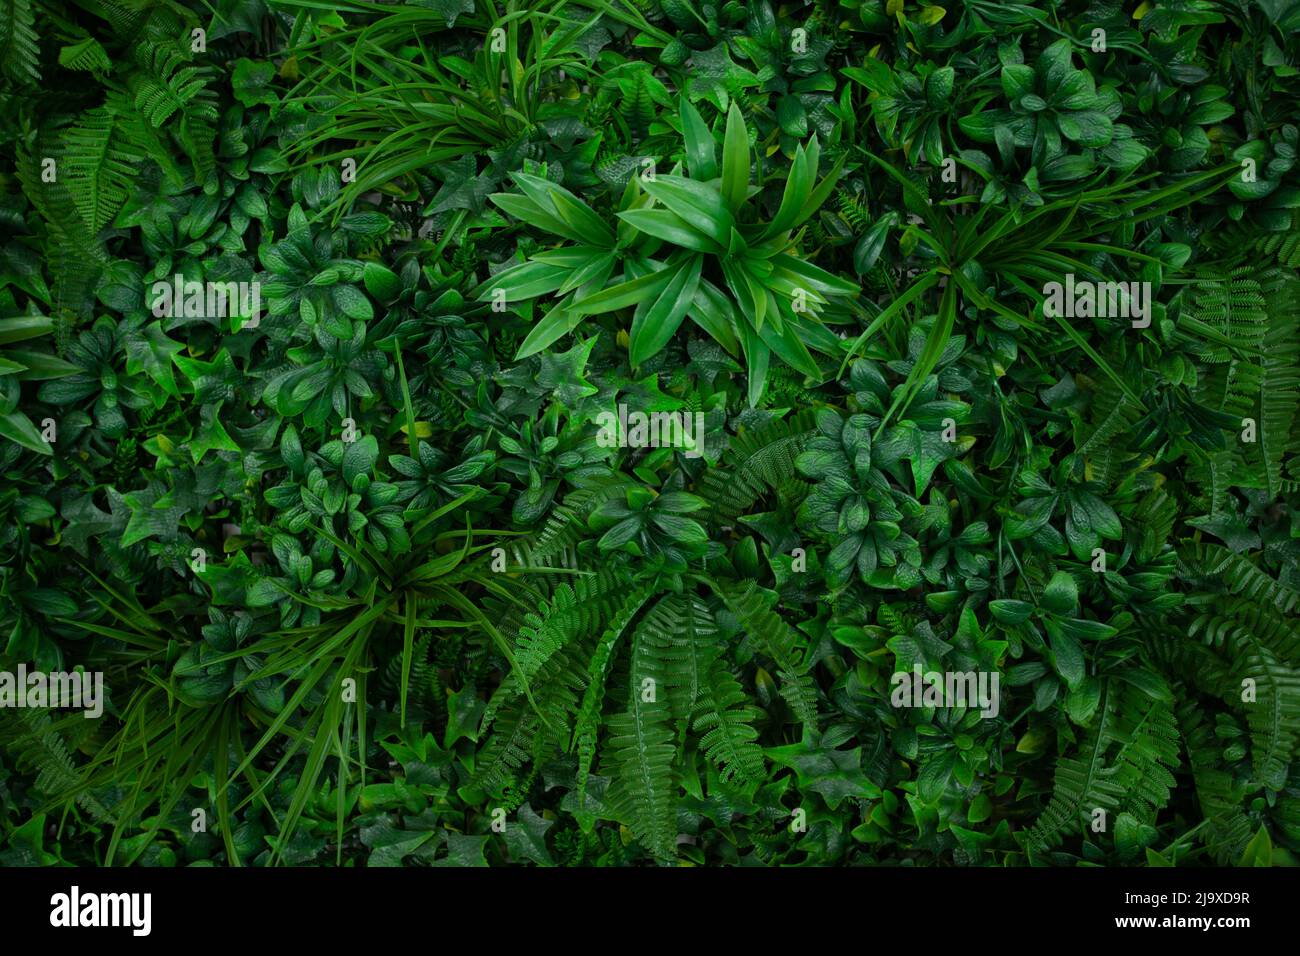 Natural background with tropical green leaves. Abstract nature pattern with tropical texture. Stock Photo